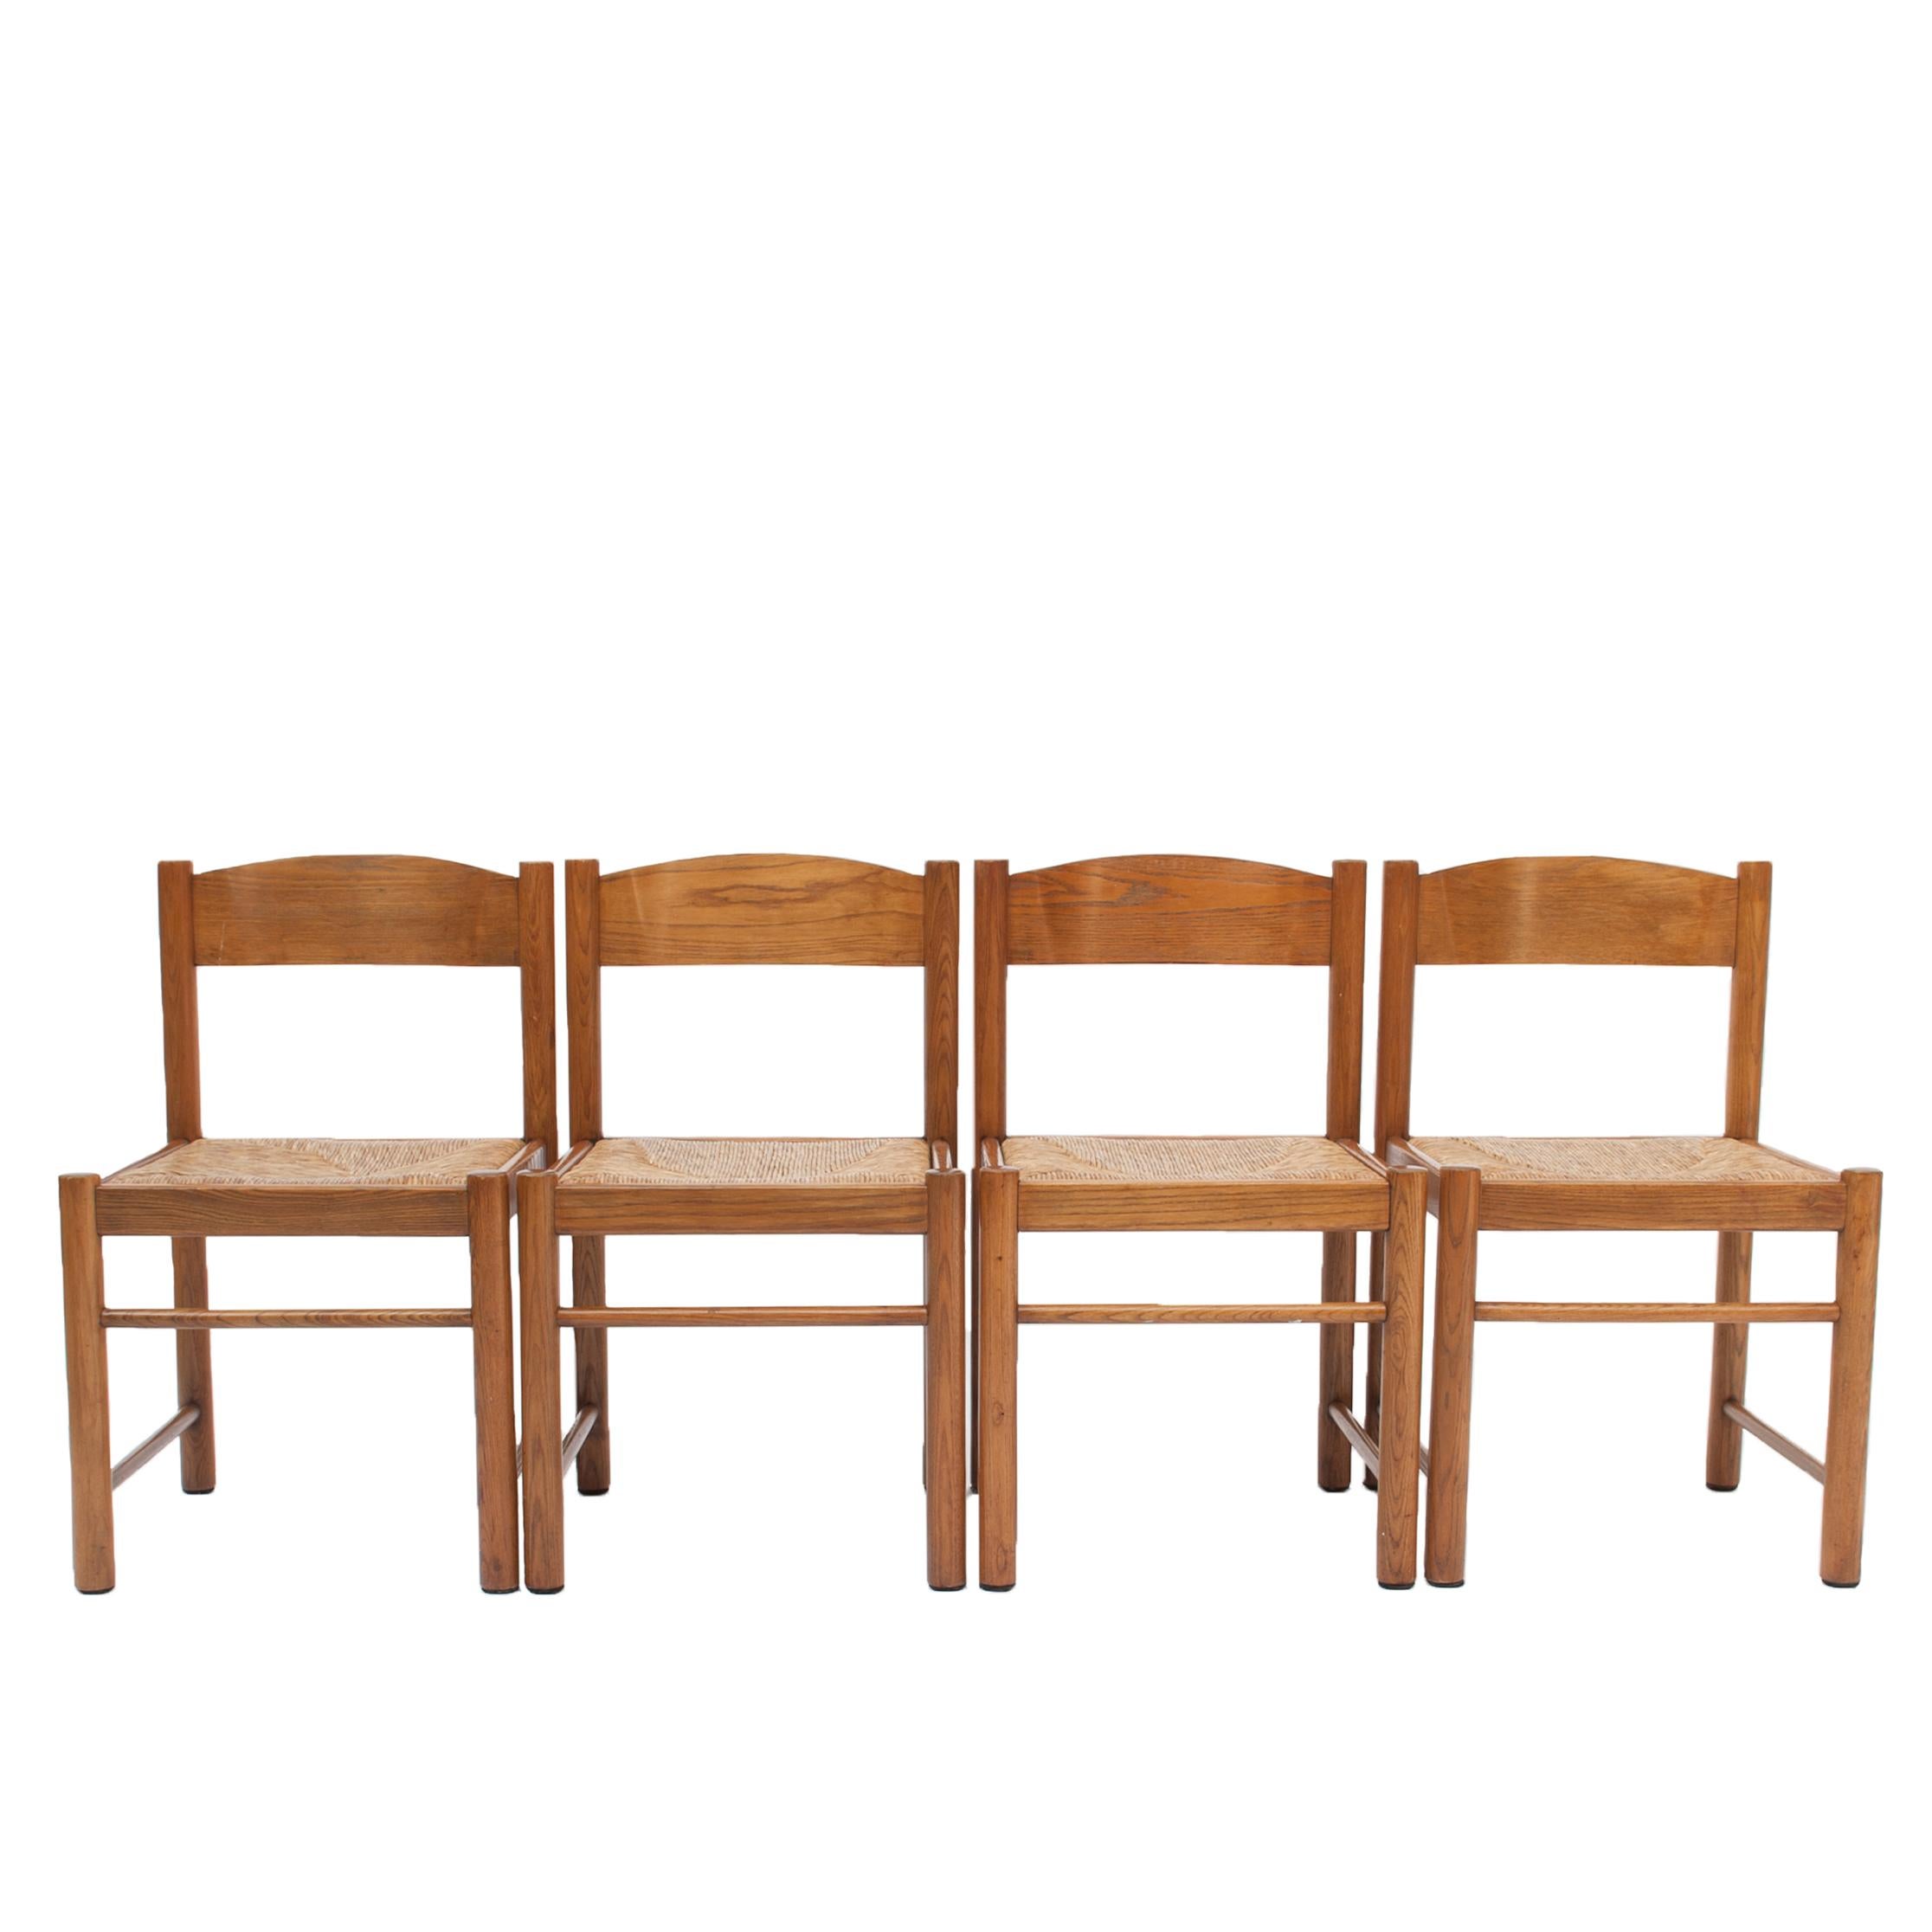 20th Century Set of 4 Natural Oak Dining Chairs Attributed to Vico Magistretti, 1960s